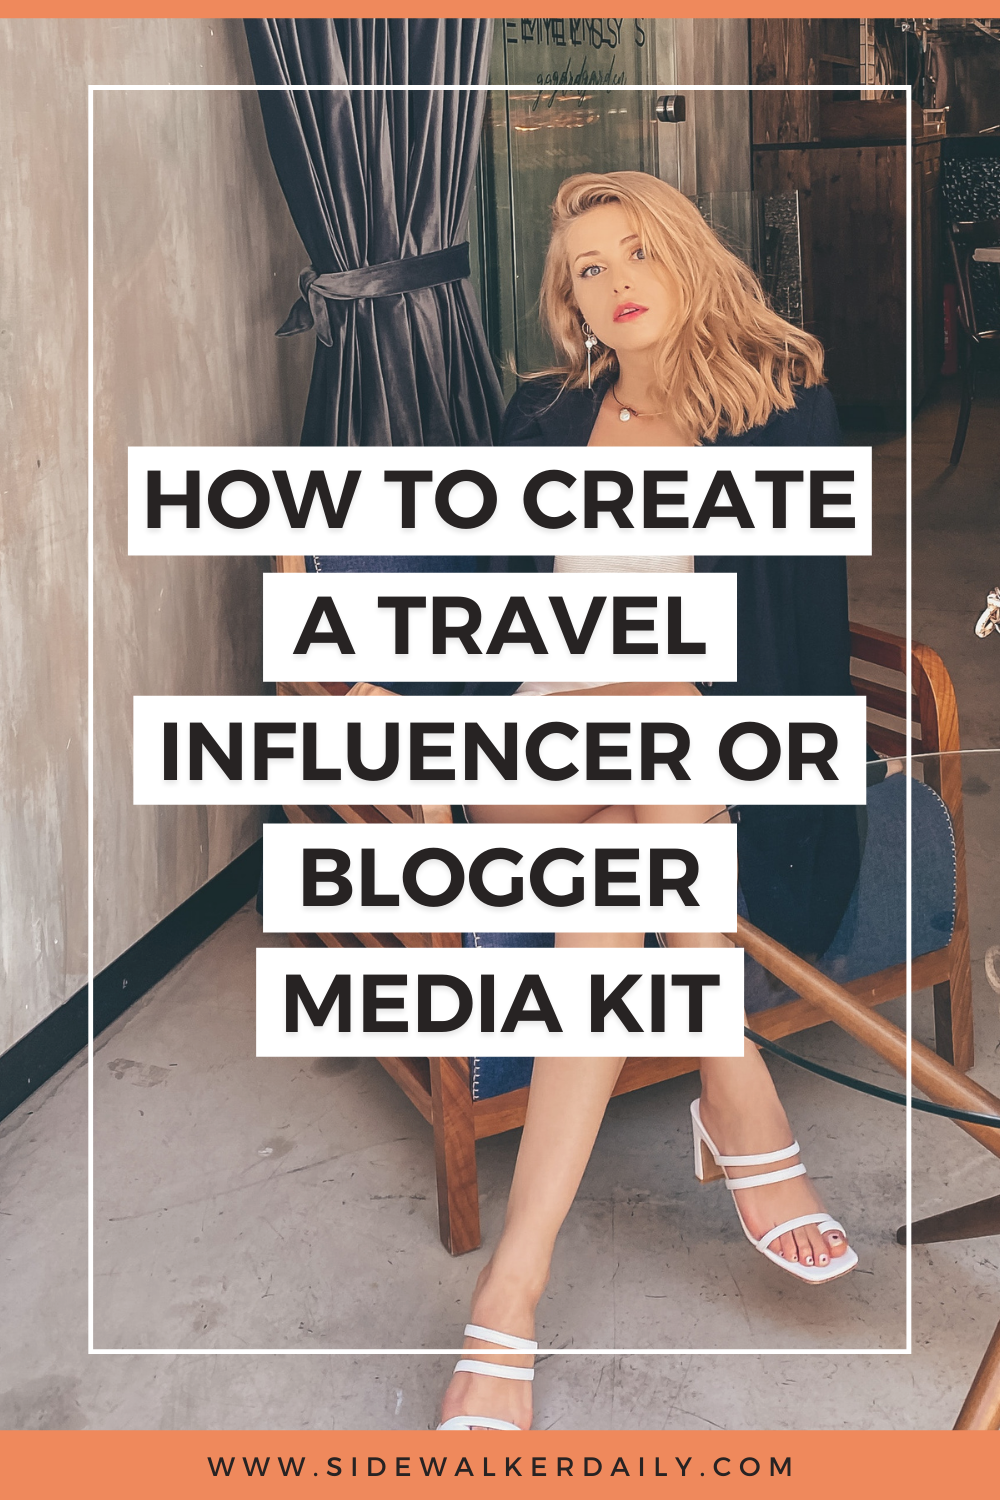 How to Create A Travel Influencer Or Blogger Media Kit